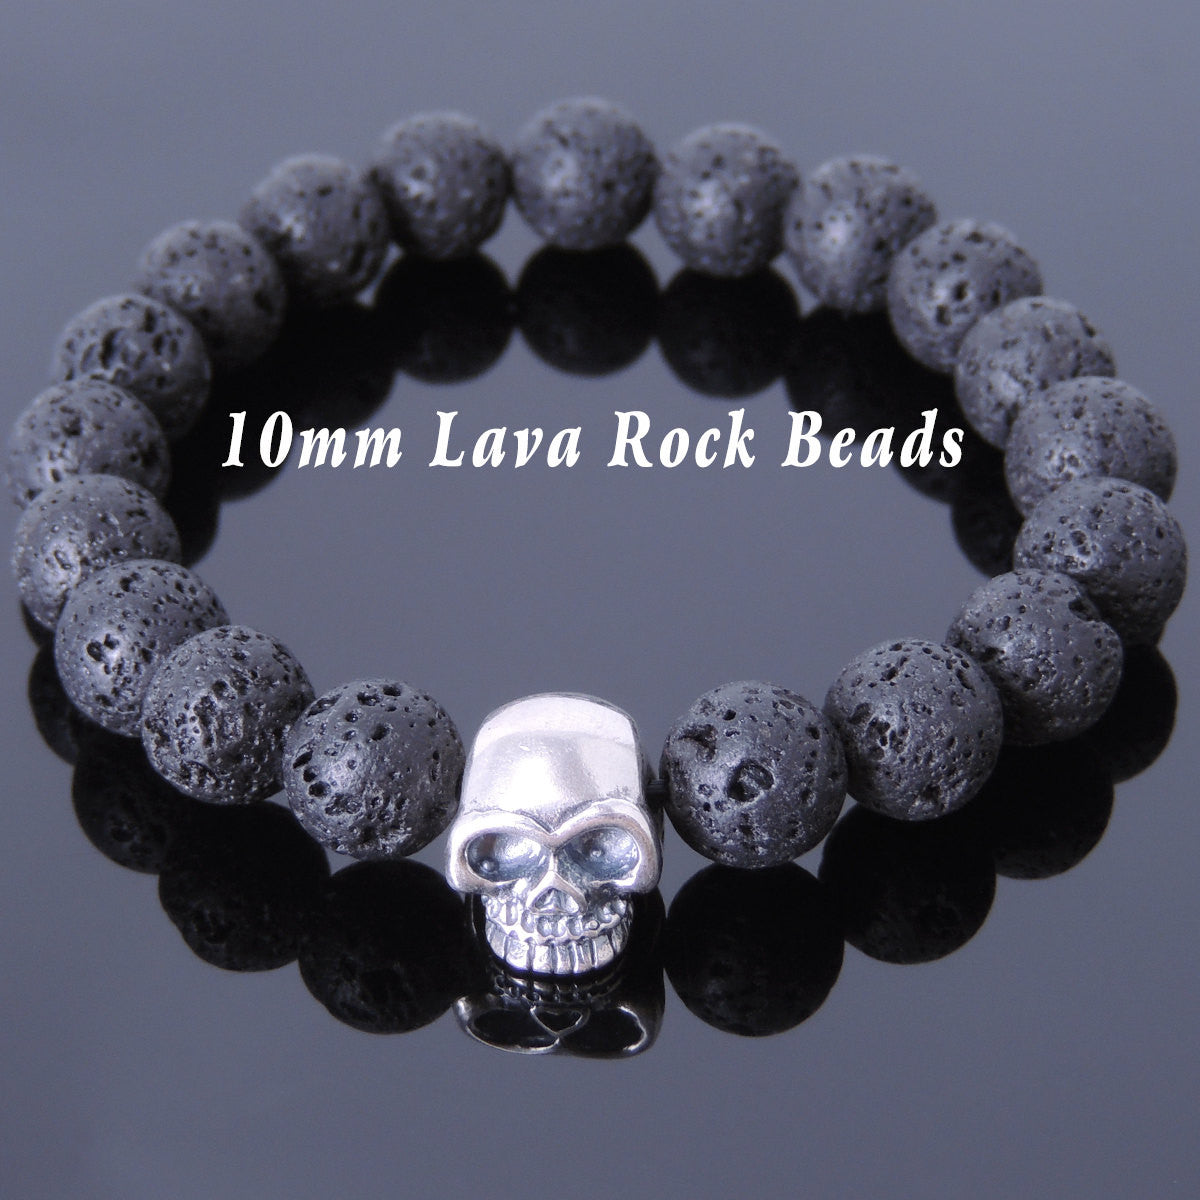 10mm Lava Rock Healing Stone Bracelet with S925 Sterling Silver Protection Skull Charm - Handmade by Gem & Silver BR607